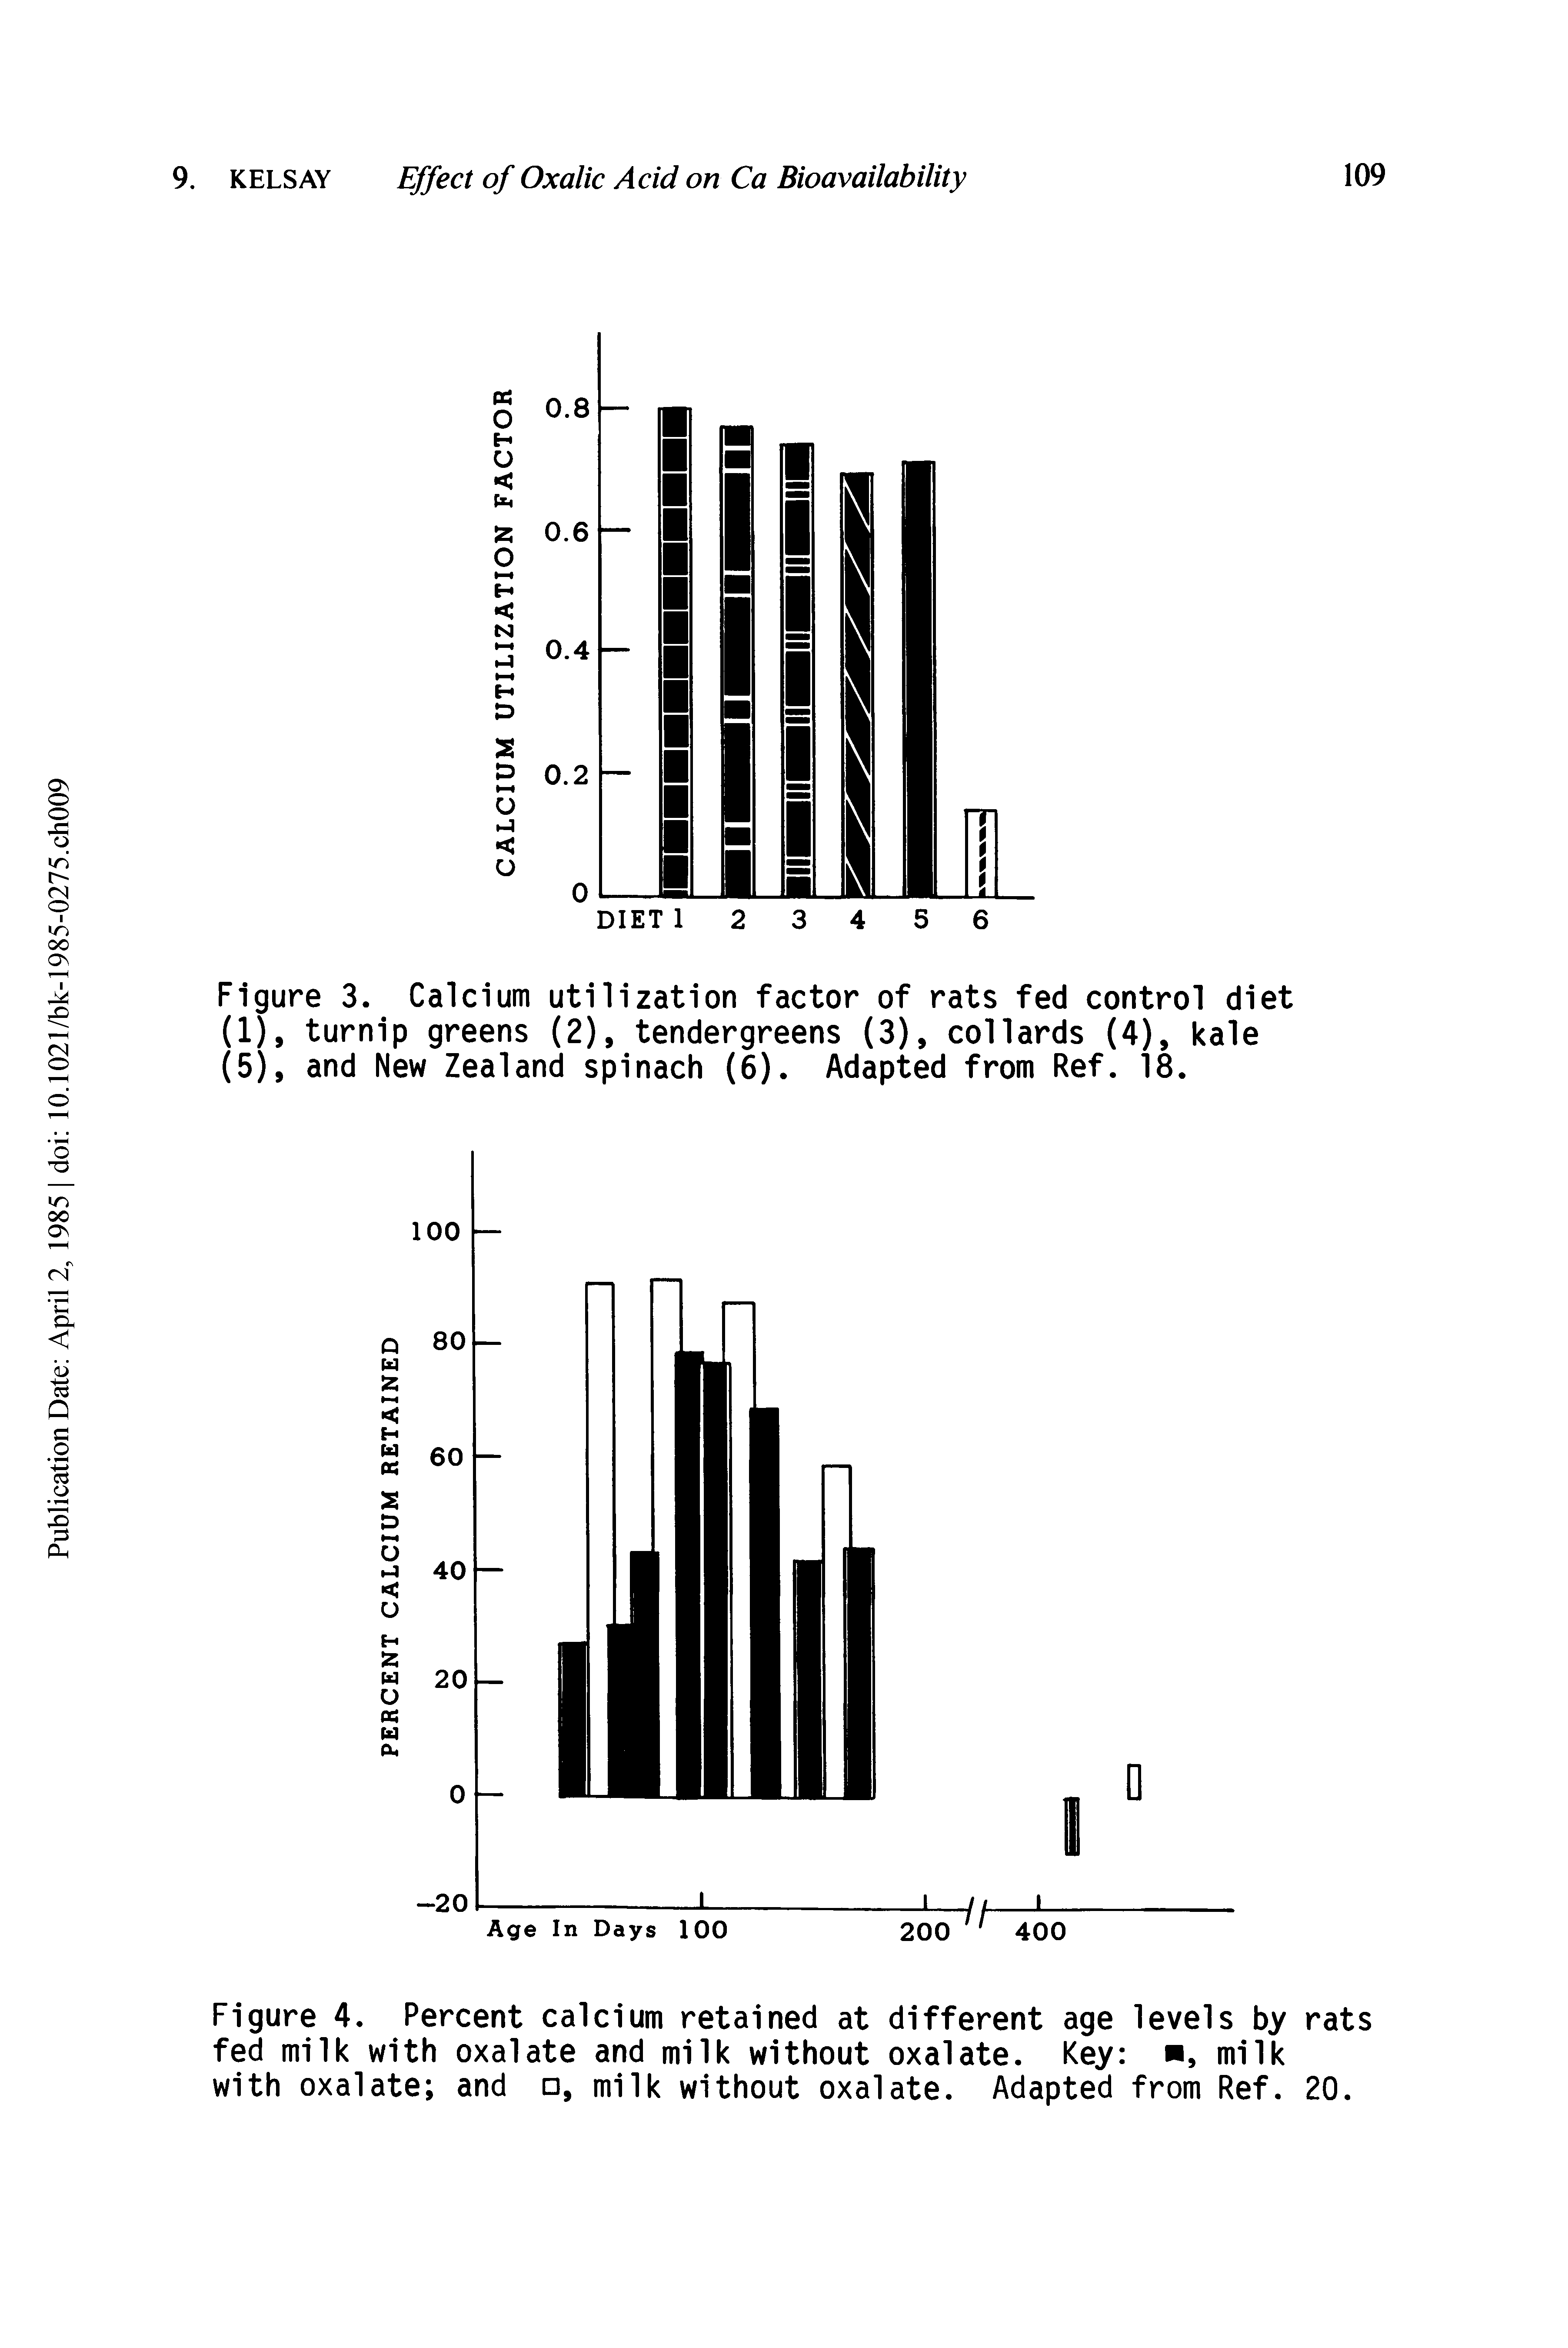 Figure 3. Calcium utilization factor of rats fed control diet (1), turnip greens (2), tendergreens (3), collards (4), kale (5), and New Zealand spinach (6). Adapted from Ref. 18.